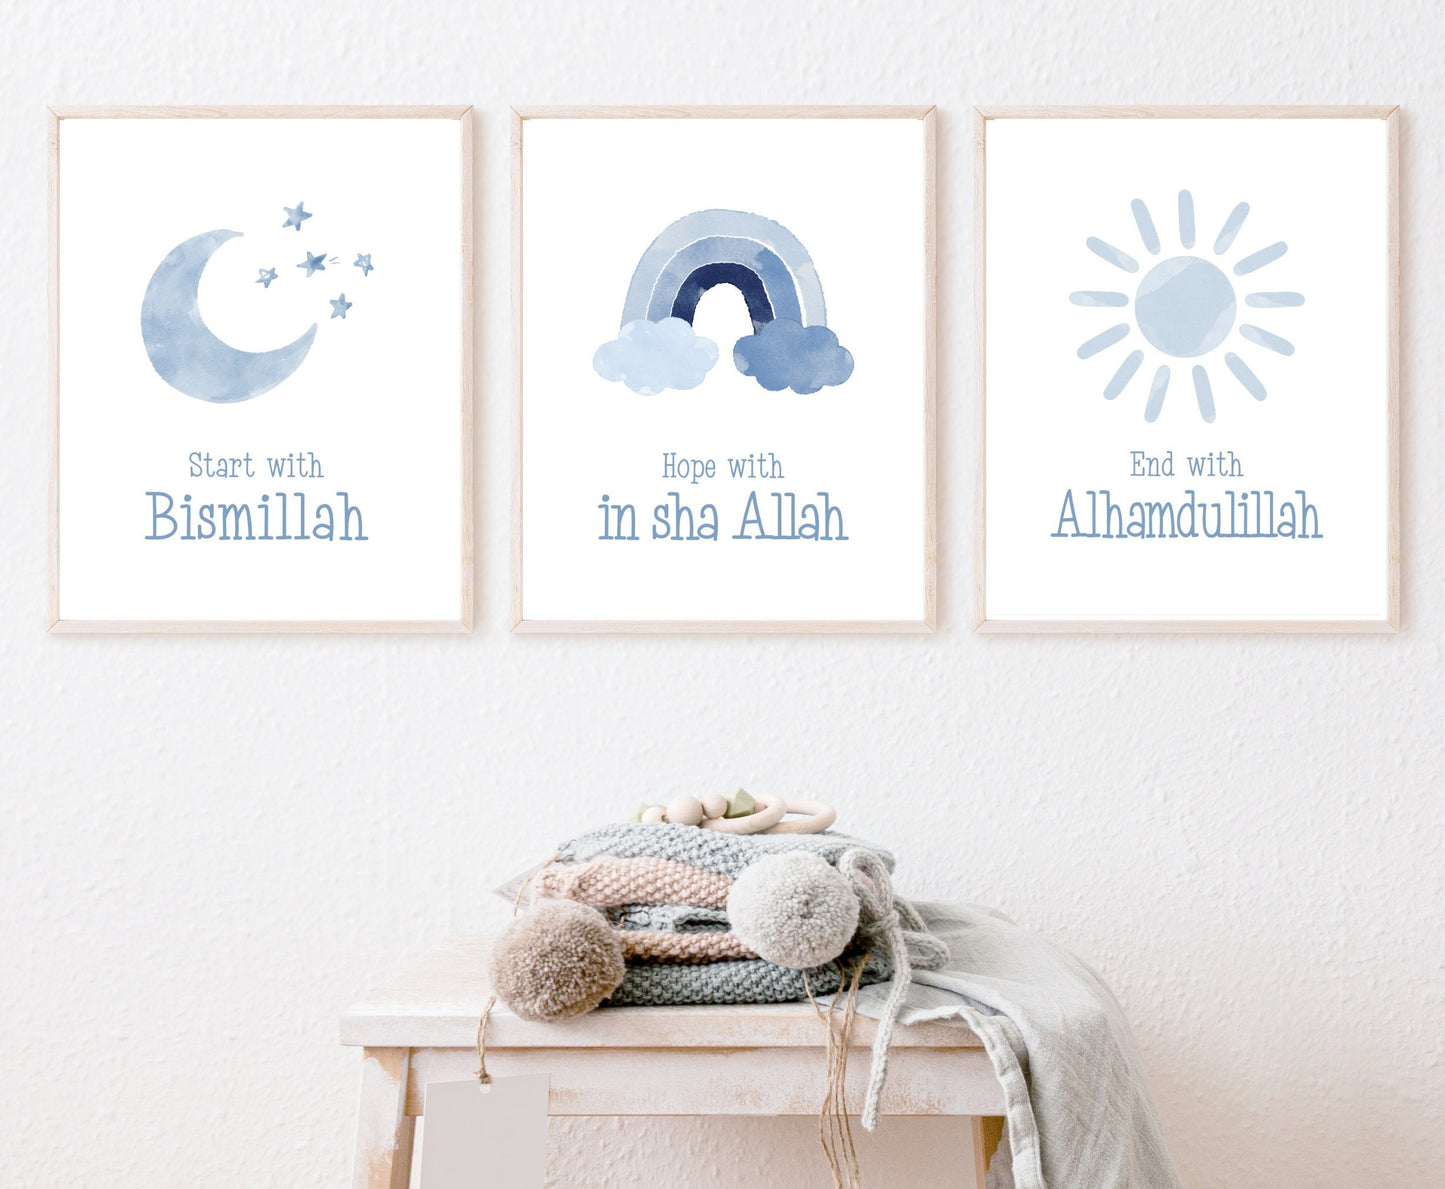 An image showing three digital print graphics that are hung on a wall. The first one shows a baby blue crescent and some tiny stars with “Start with Bismillah” written right below. The middle graphic is a baby blue rainbow with “Hope with In Sha Allah” written just below it. The last frame shows a graphic of a baby blue sun with “End with Alhamdulillah” written just below the latter.